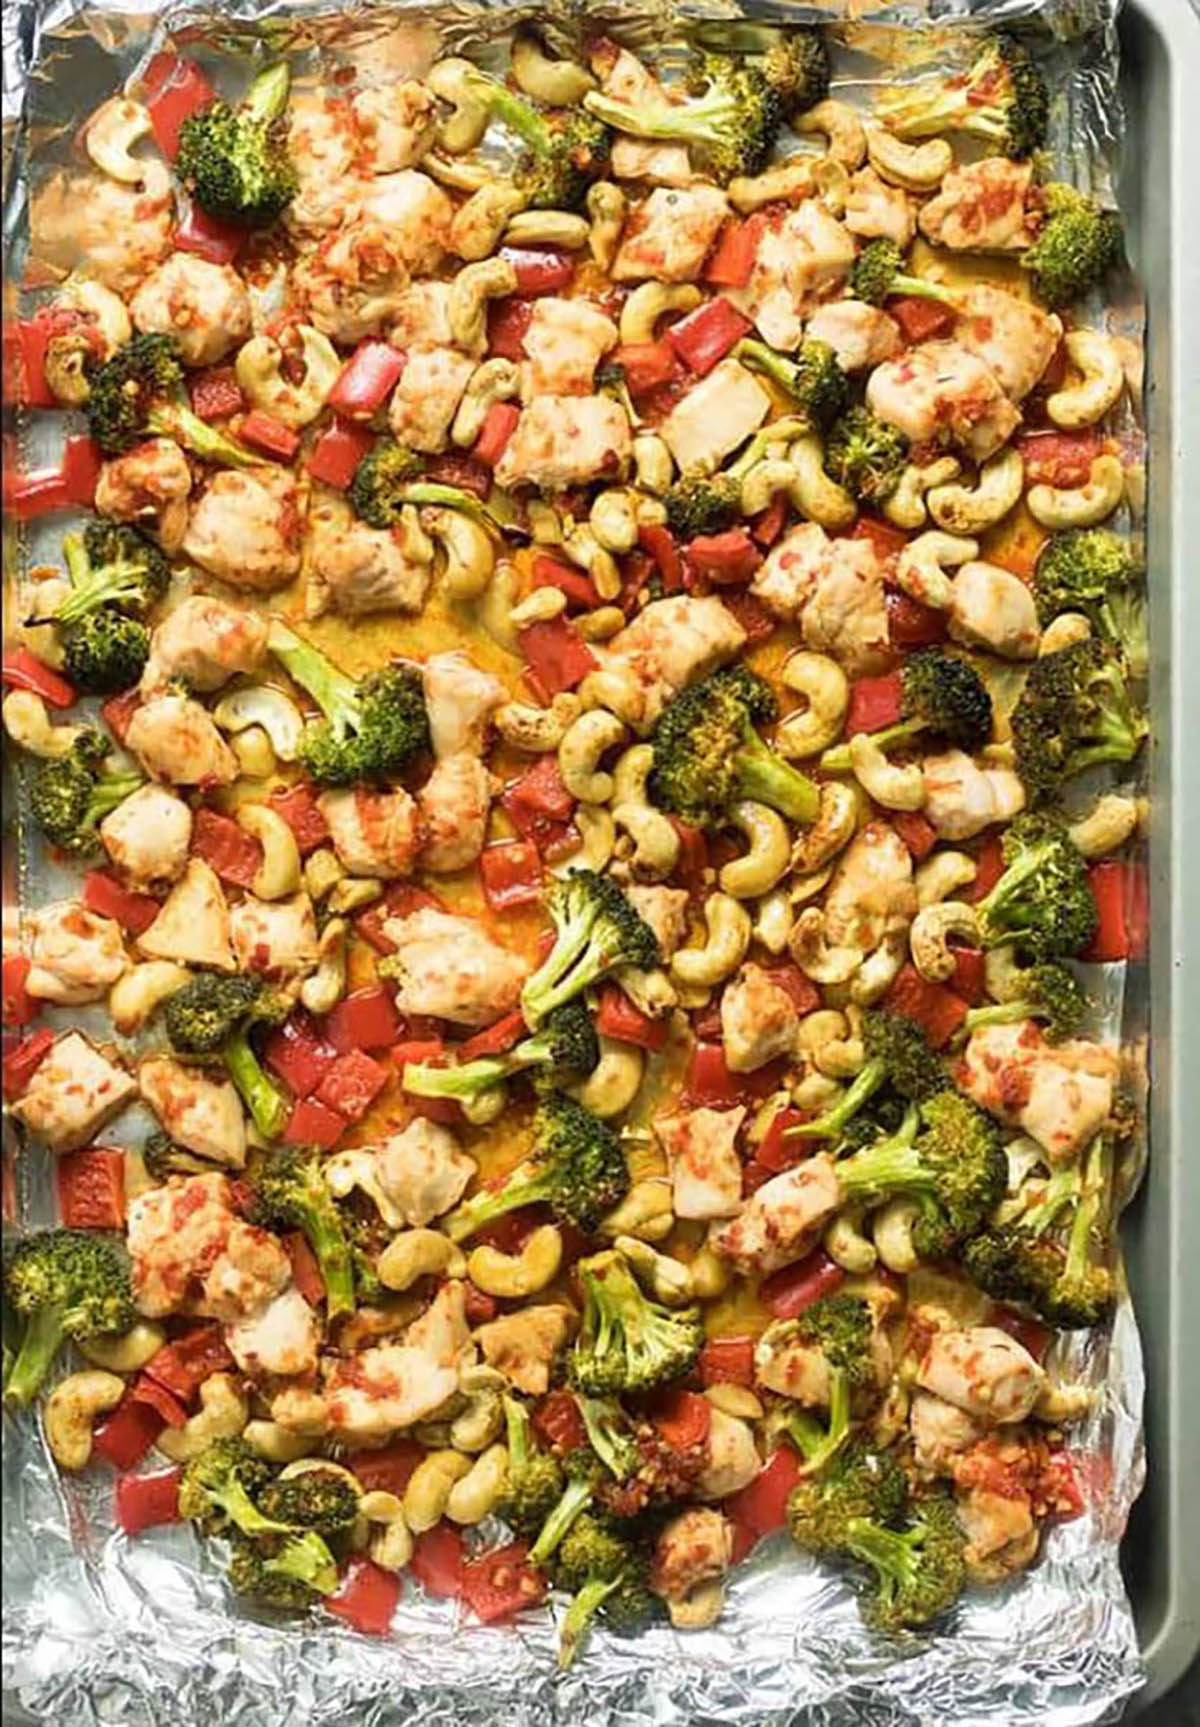 Easy Sheet Pan Cashew Chicken with broccoli and bell peppers